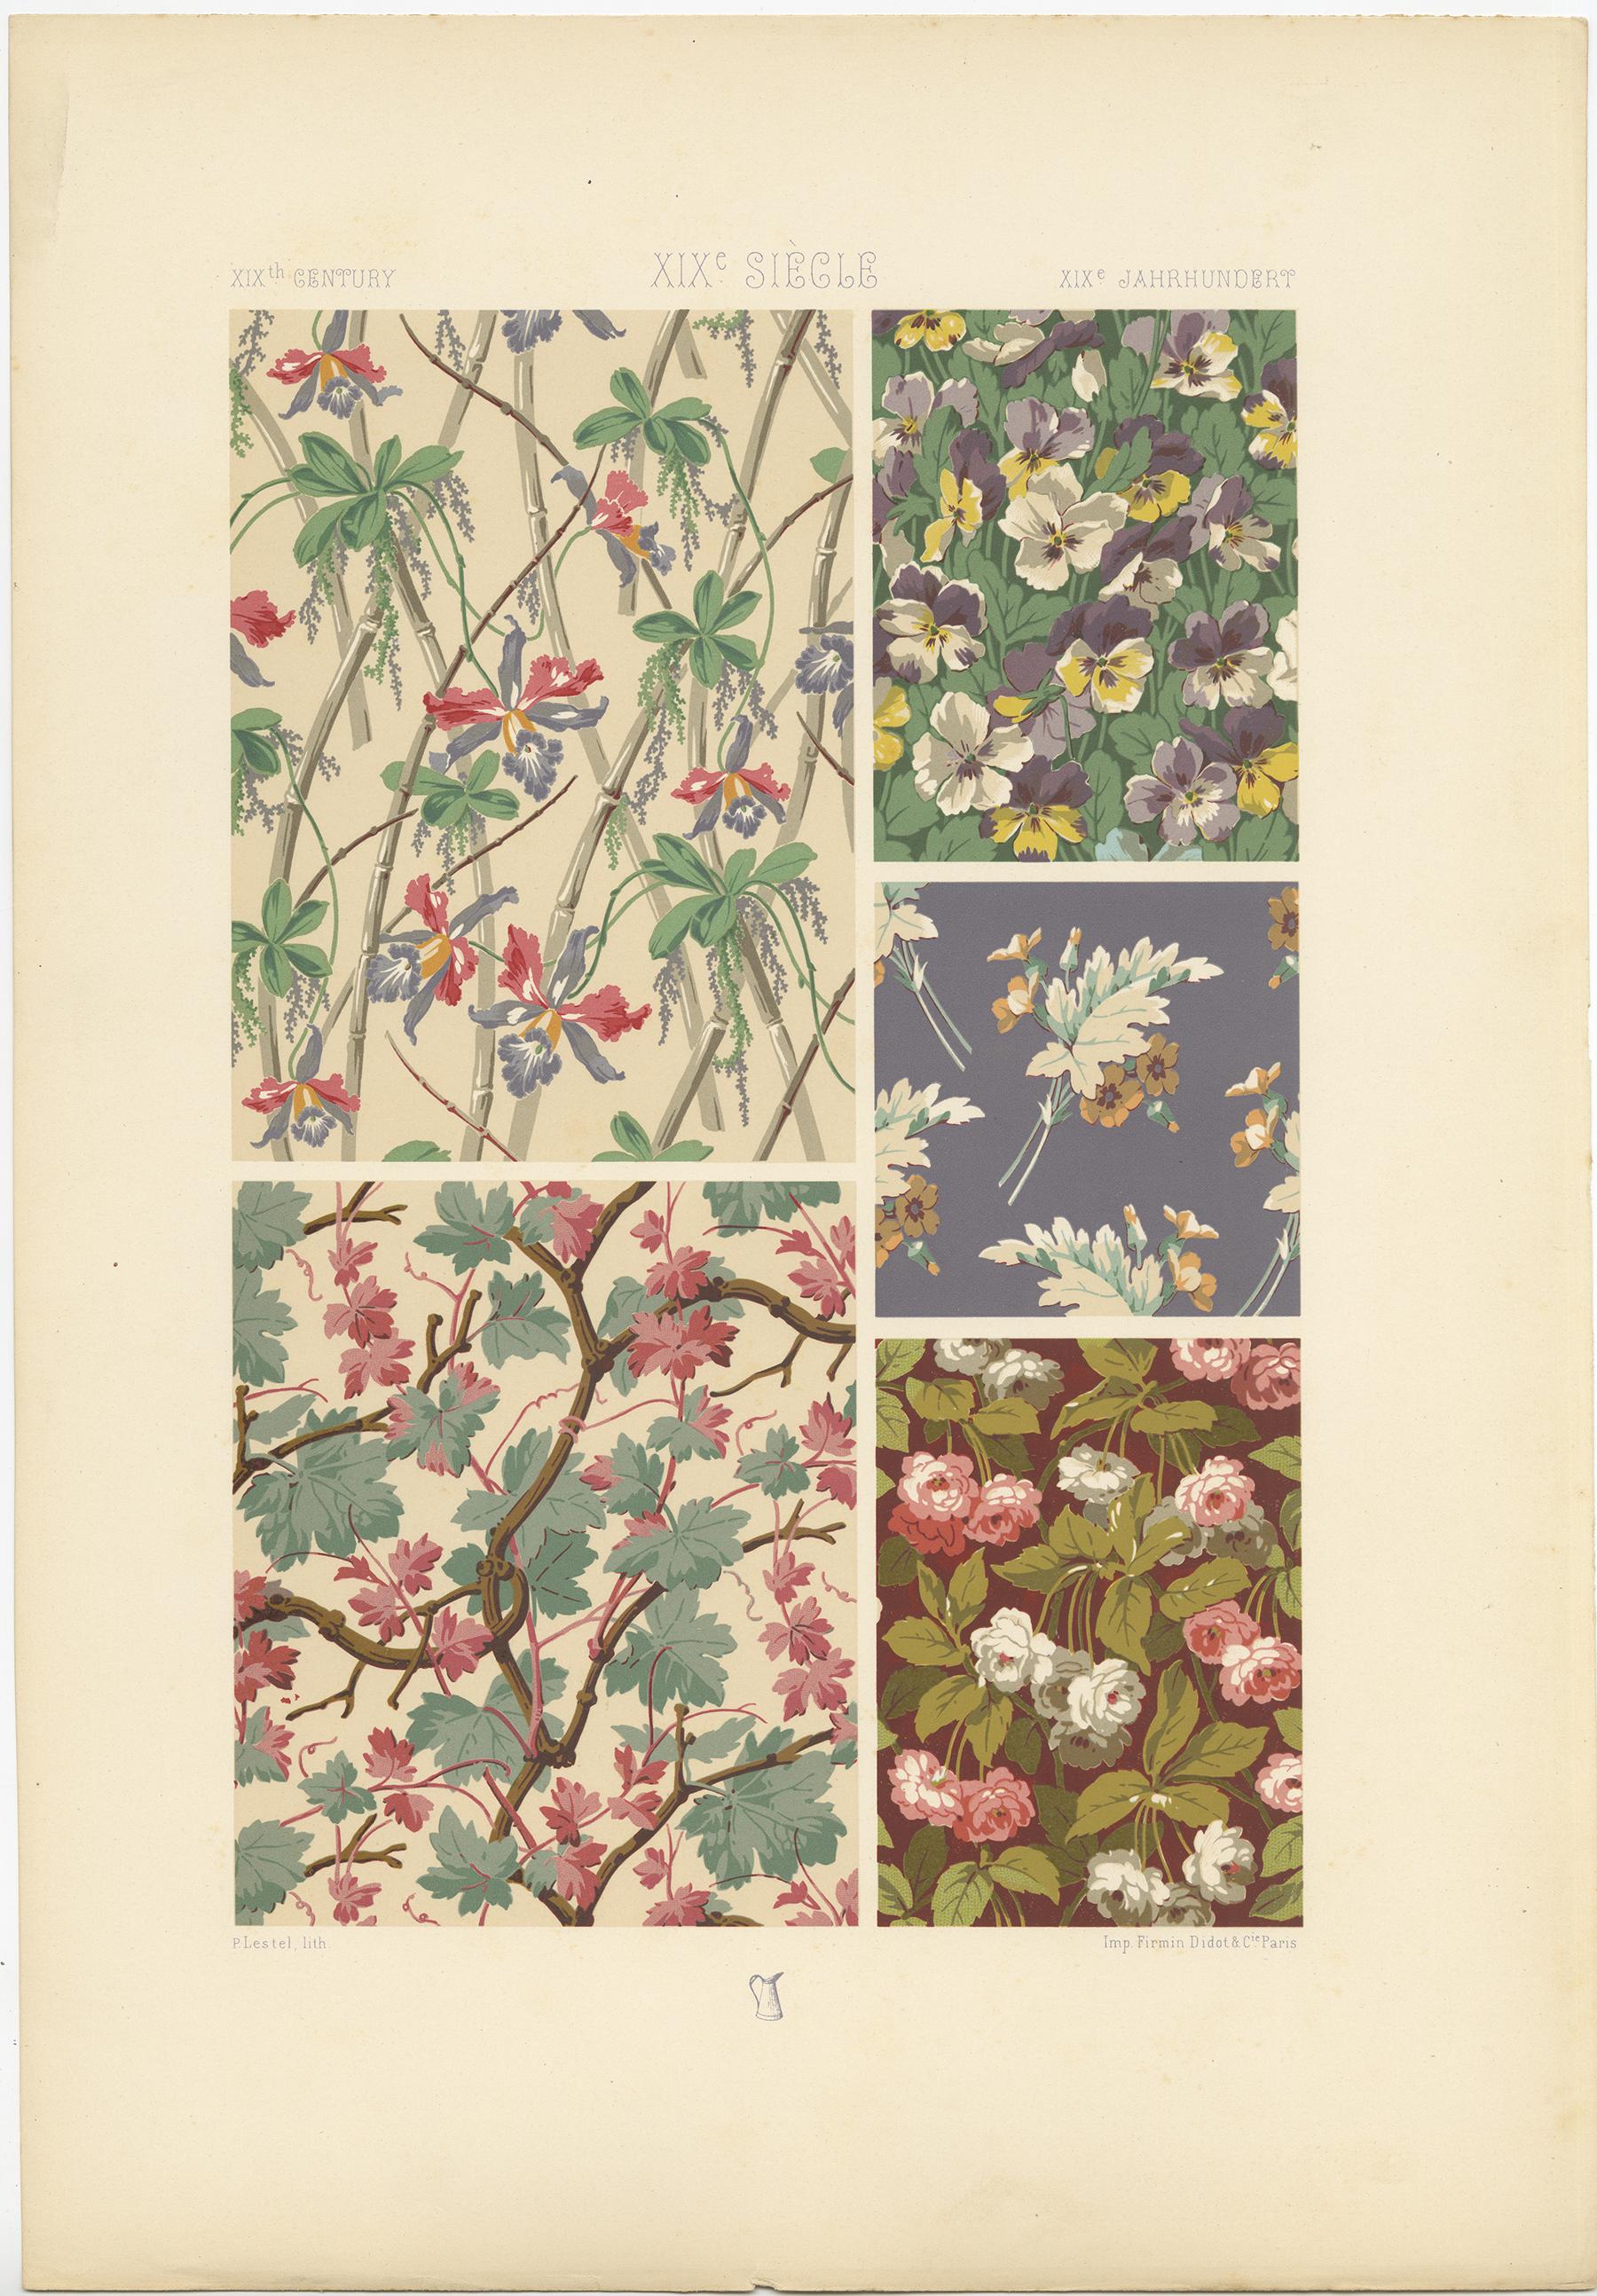 Antique print titled '19th Century - XIXc Siècle -XIXles Jahrhundert'. Chromolithograph of designs from painted fabrics and wallpapers ornaments. This print originates from 'l'Ornement Polychrome' by Auguste Racinet. Published circa 1890.